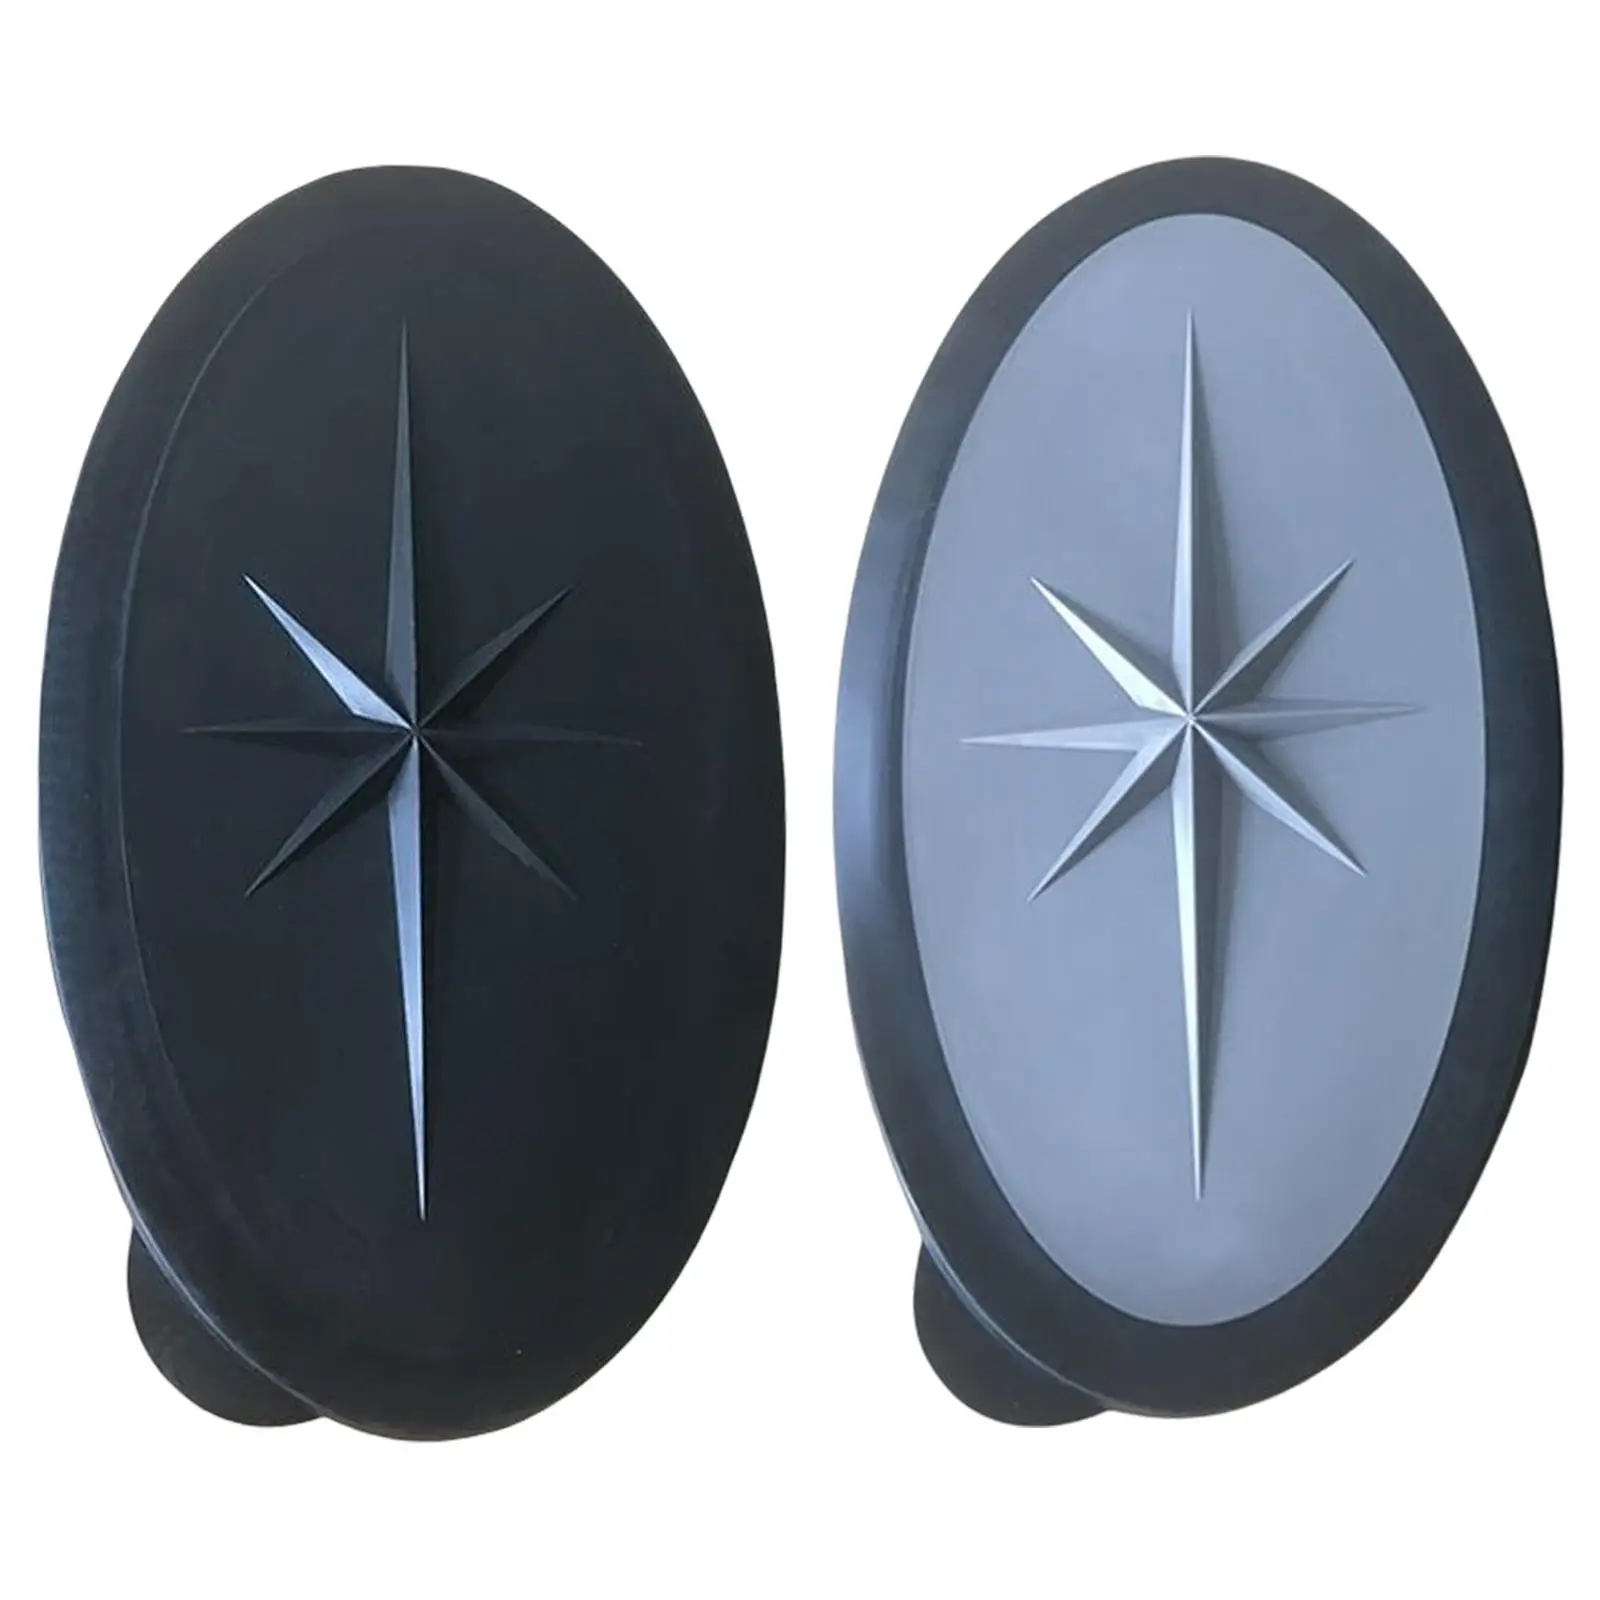 Oval Hatch Cover Boat Accessories Waterproof Non-Slip ABS Boat Hatch Lid Kayak Fit for Water Sport Canoe Yacht